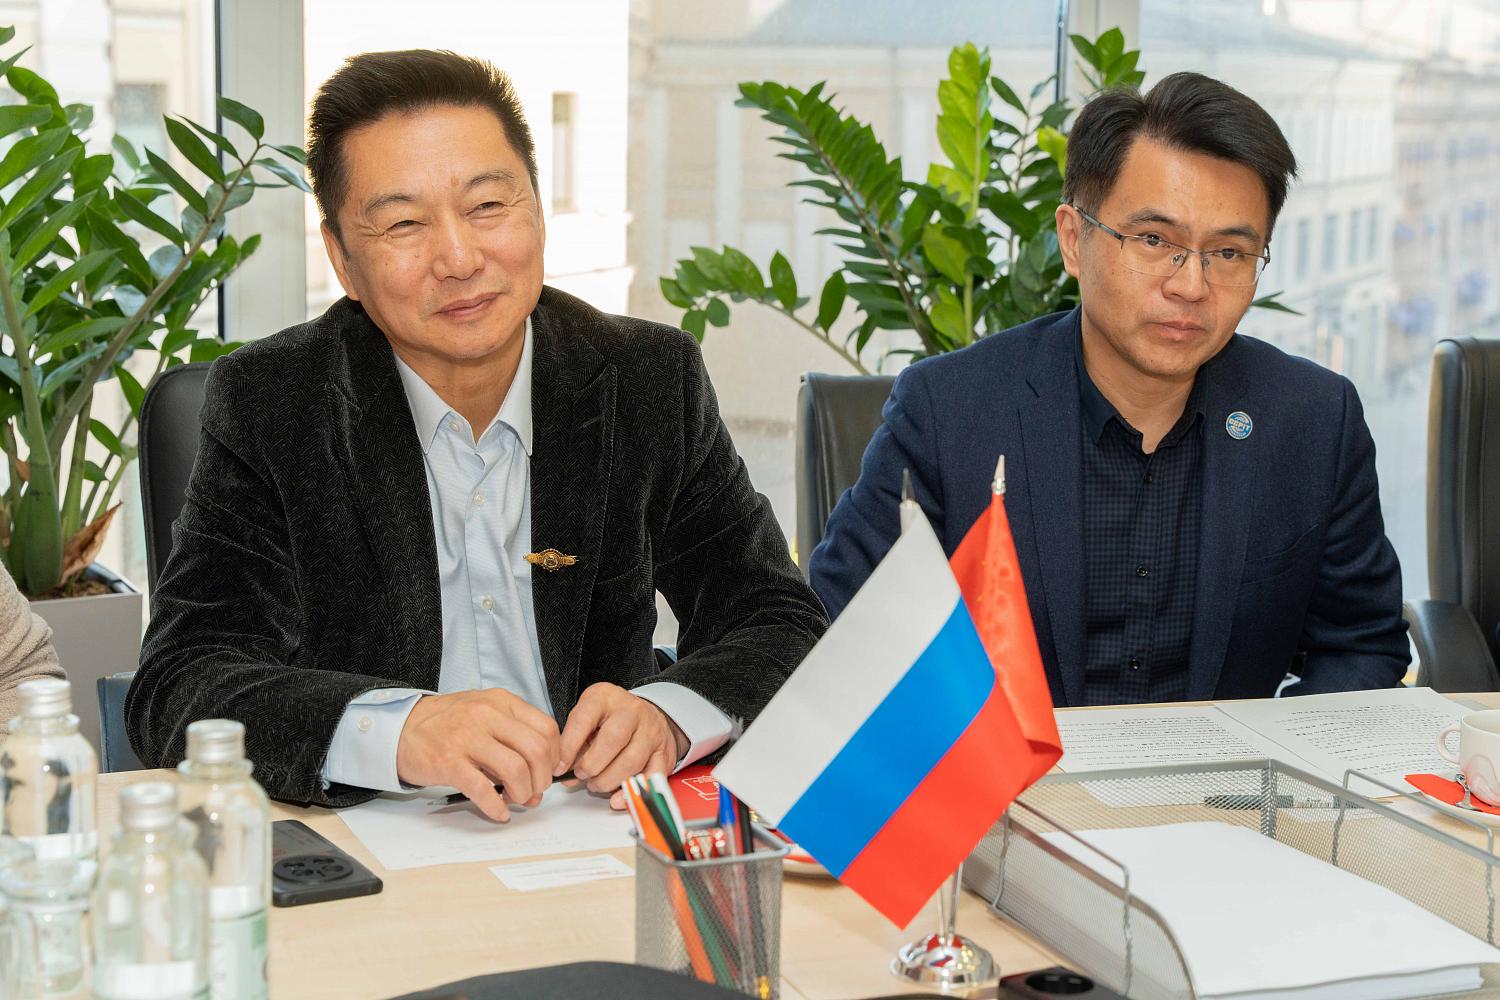 A meeting with a business delegation of Chinese entrepreneurs took place at the Moscow Chamber of Commerce and Industry